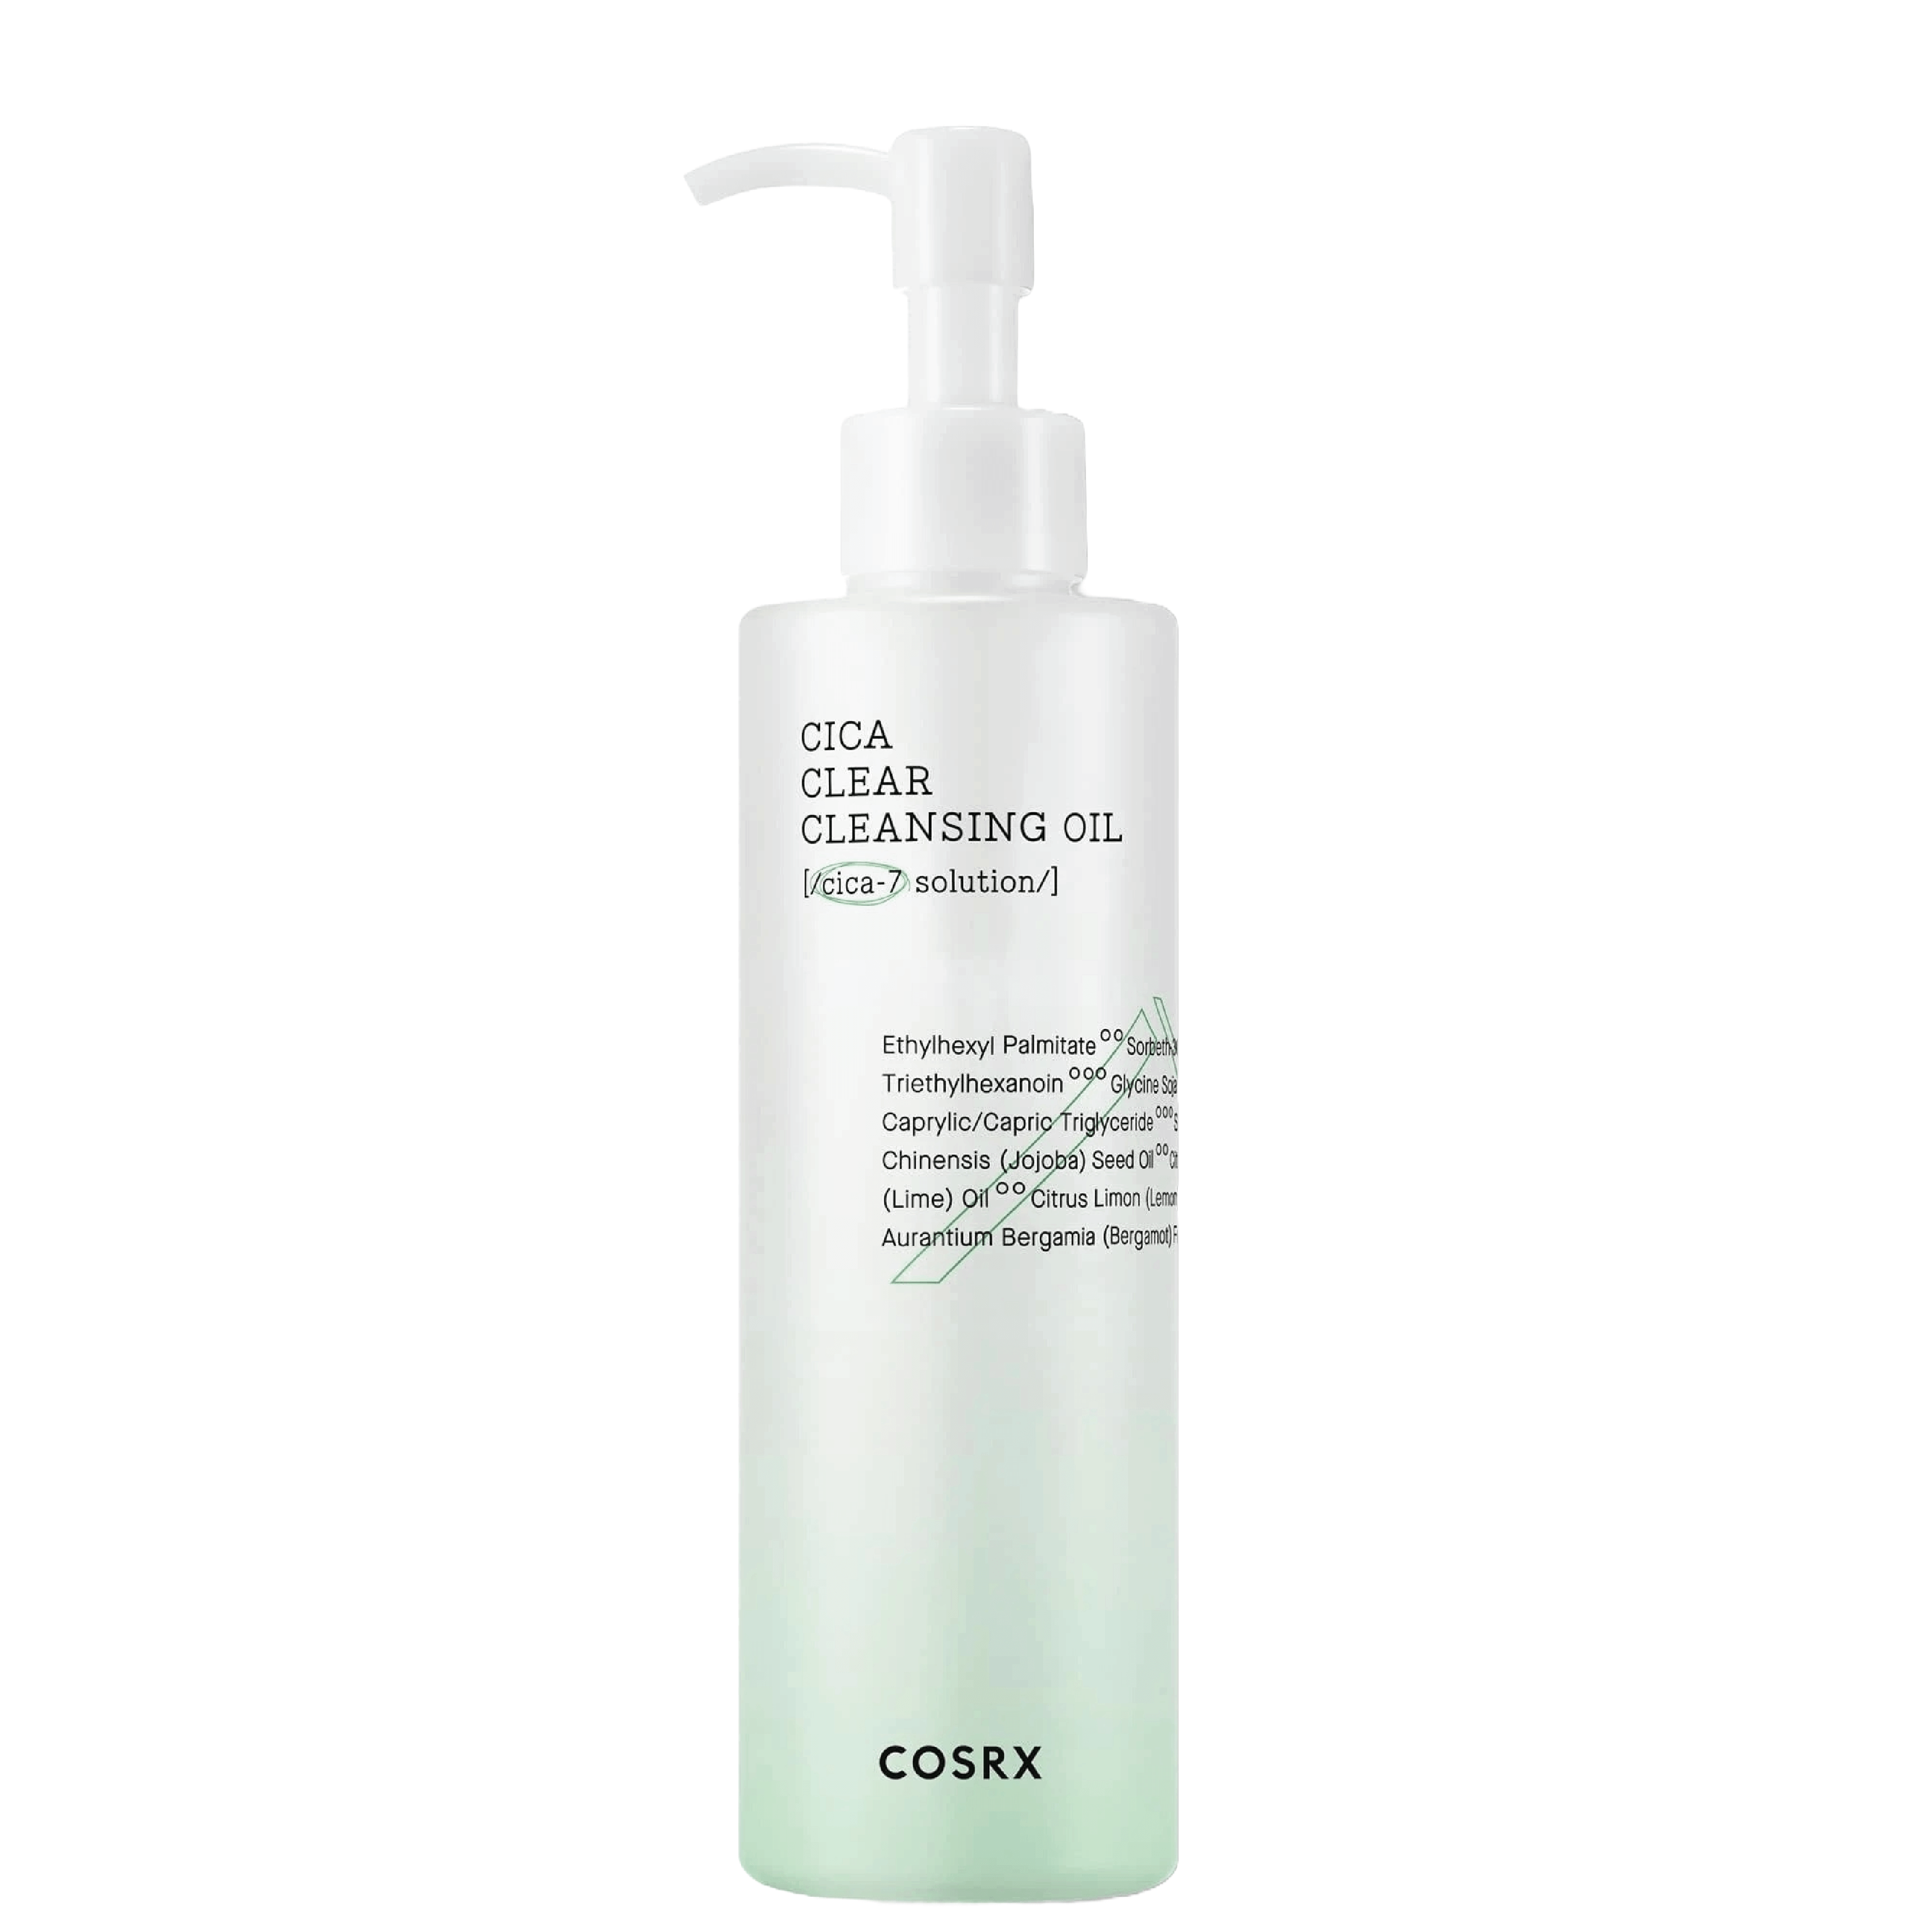 Cosrx Pure Fit Cica Clear Cleansing Oil